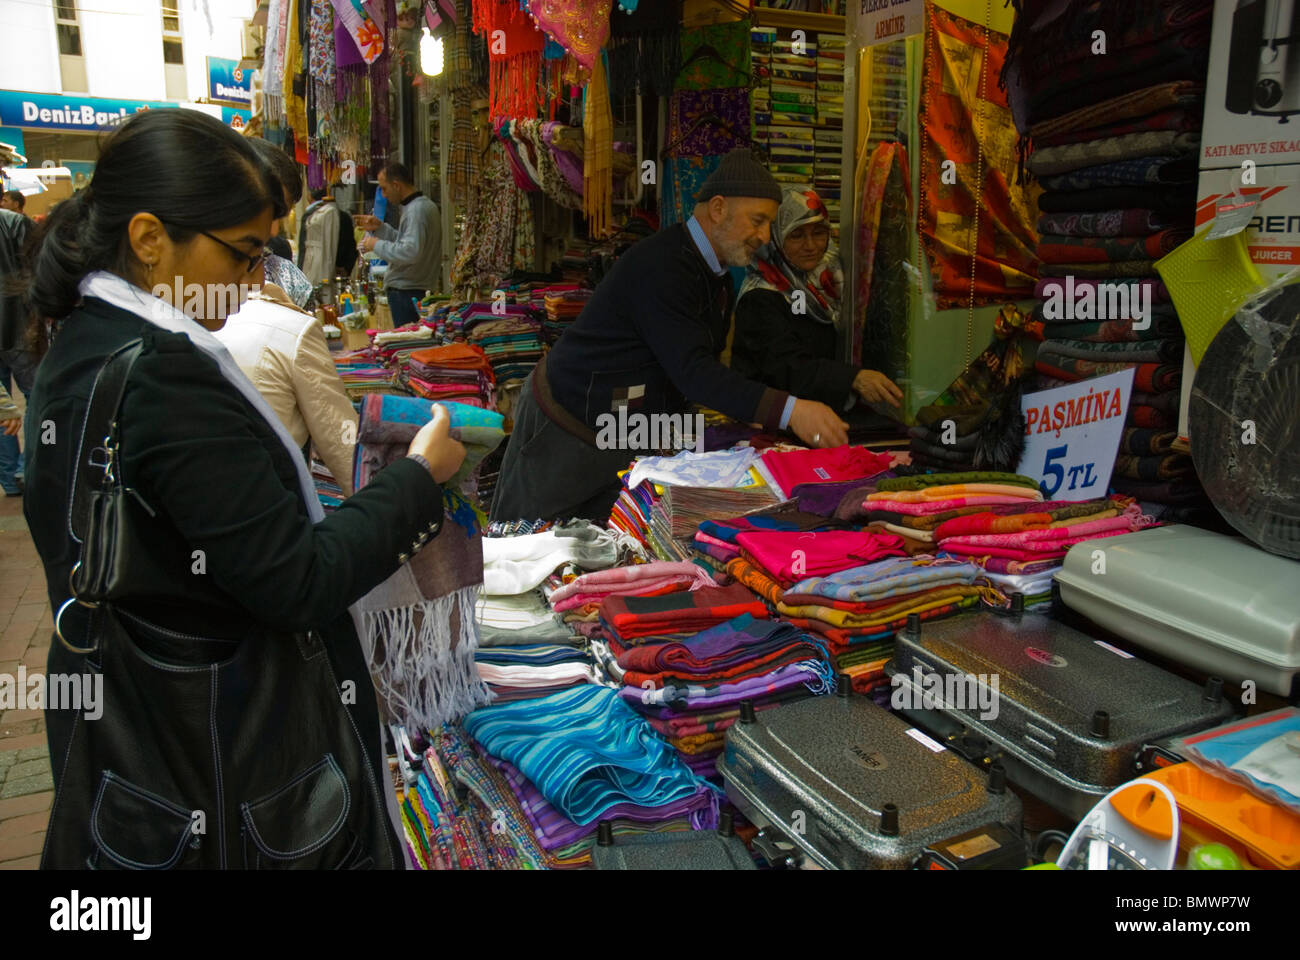 People shopping for scarves at a scarf stall "Kashimi Scarves" in  Spitalfields Market near Brick Lane in East London E1 UK KATHY DEWITT Stock  Photo - Alamy